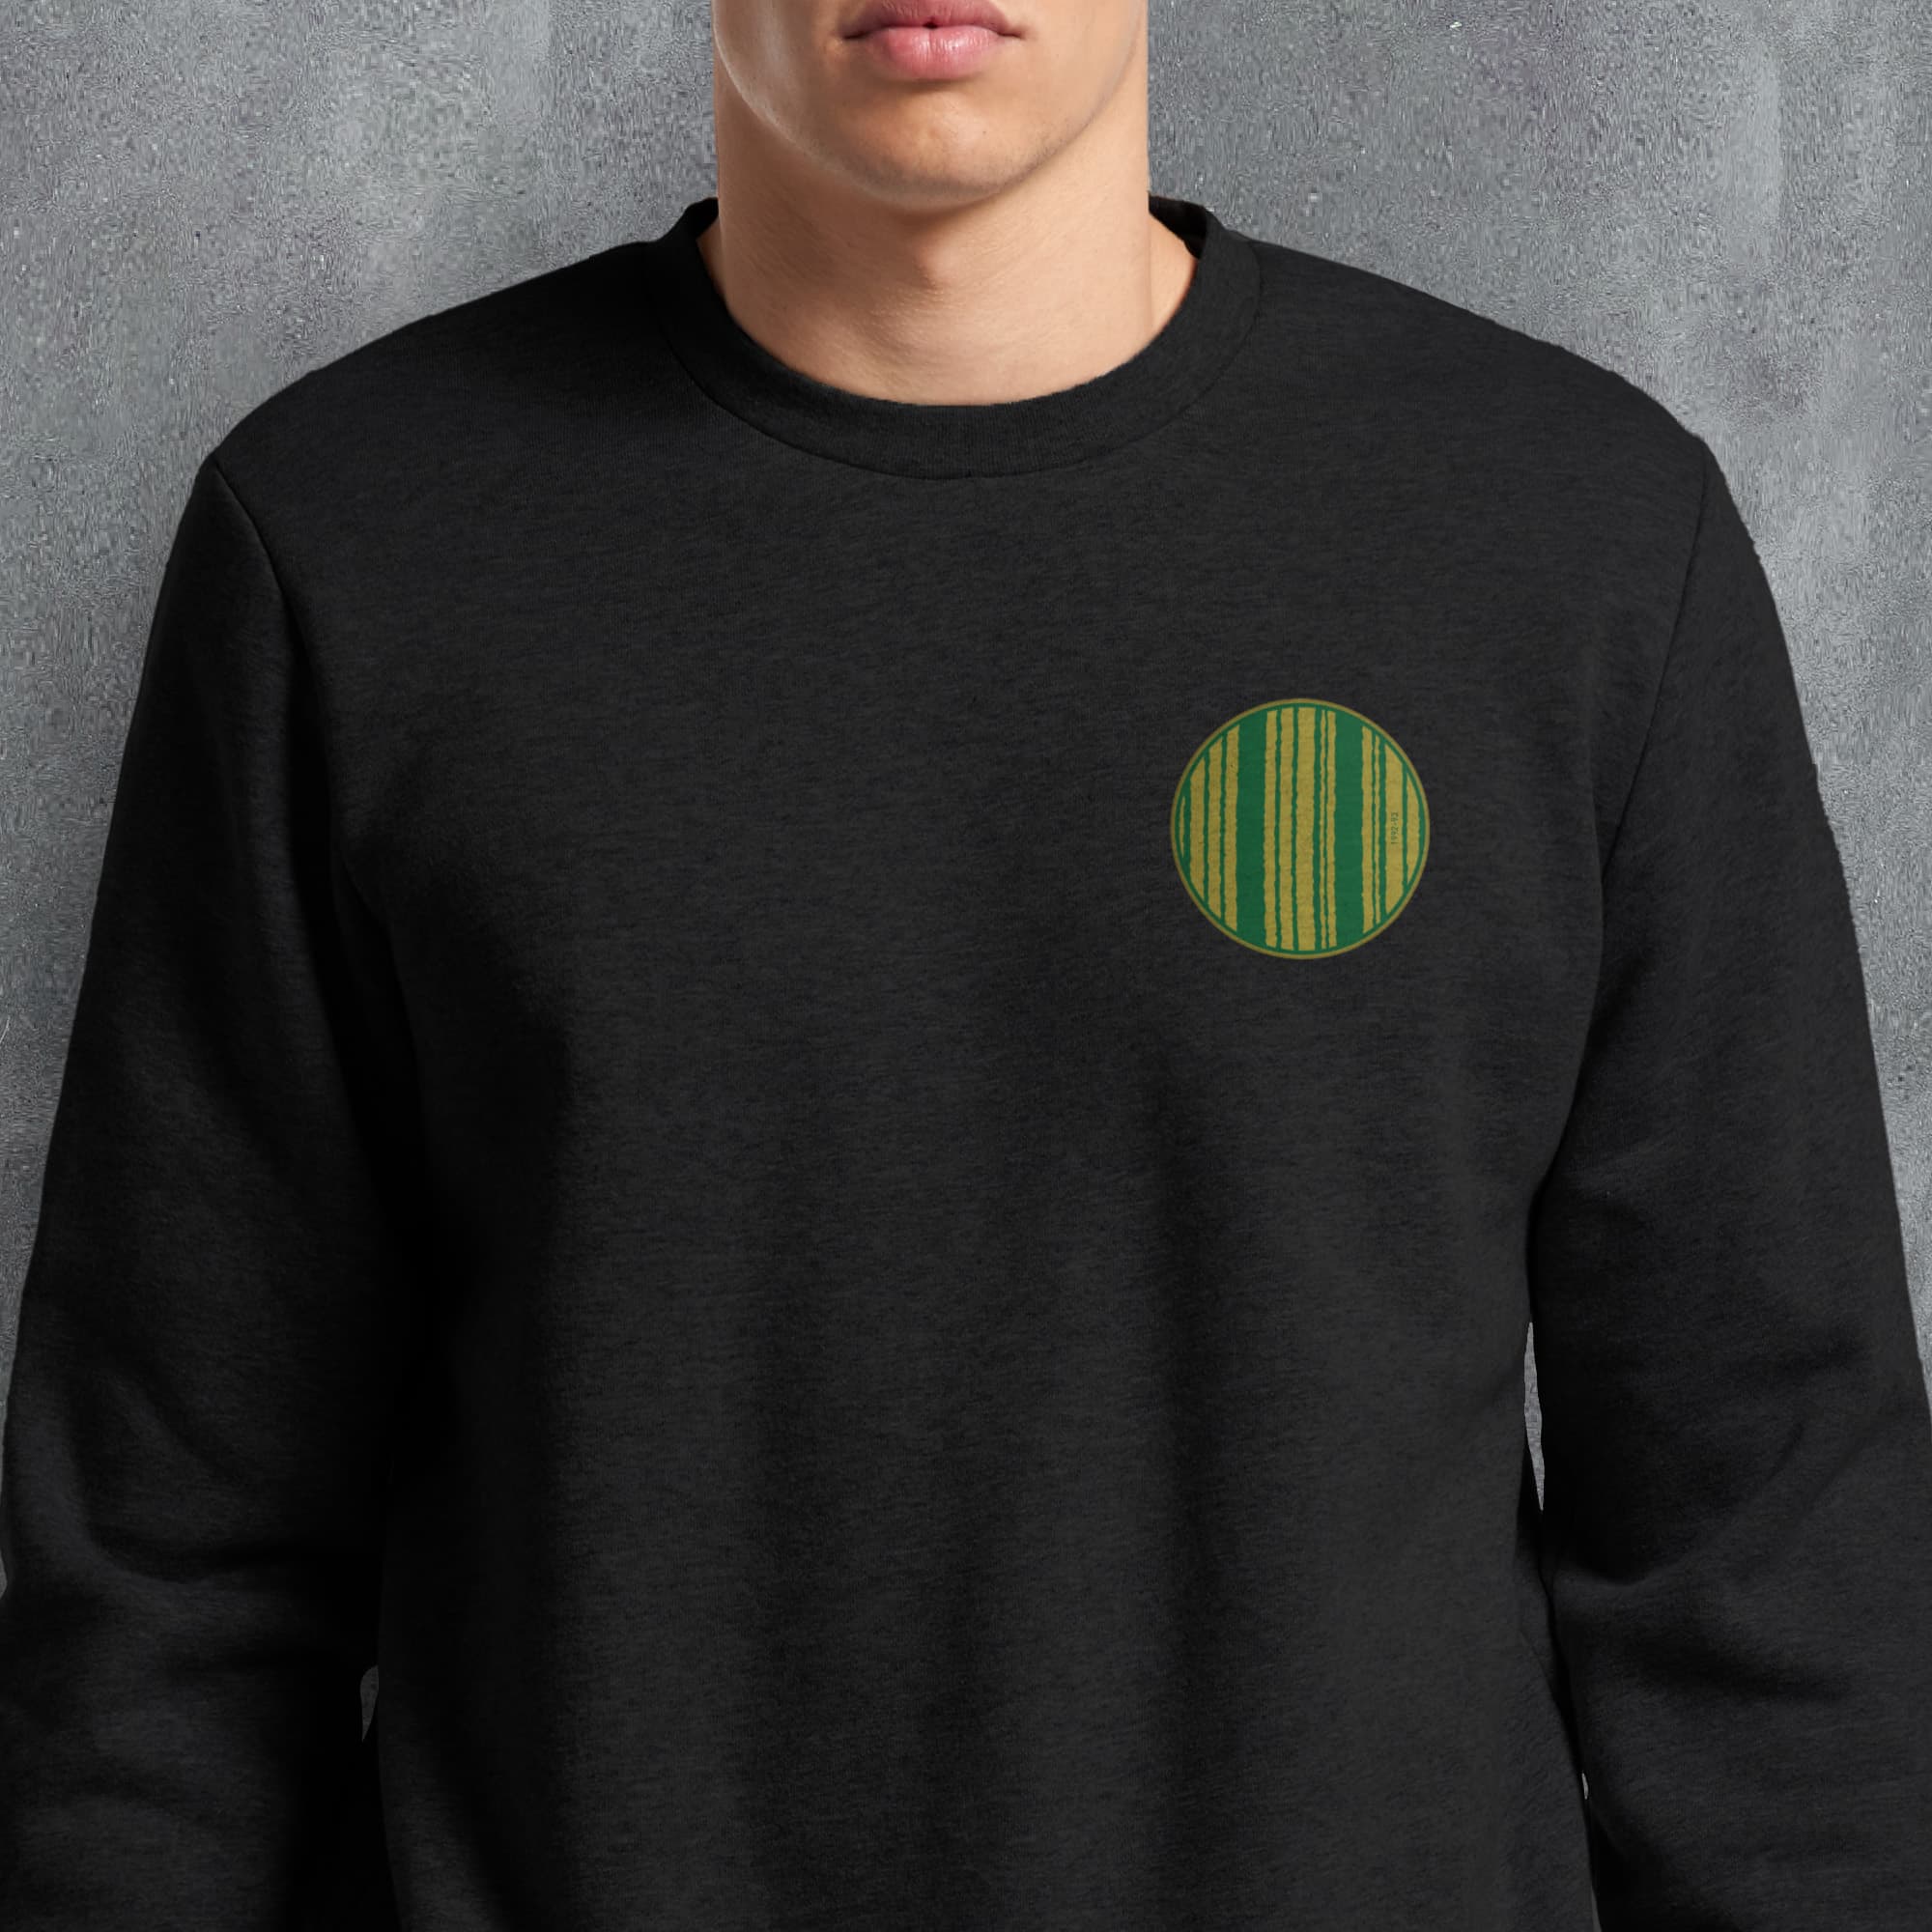 a man wearing a black sweatshirt with a green circle on it